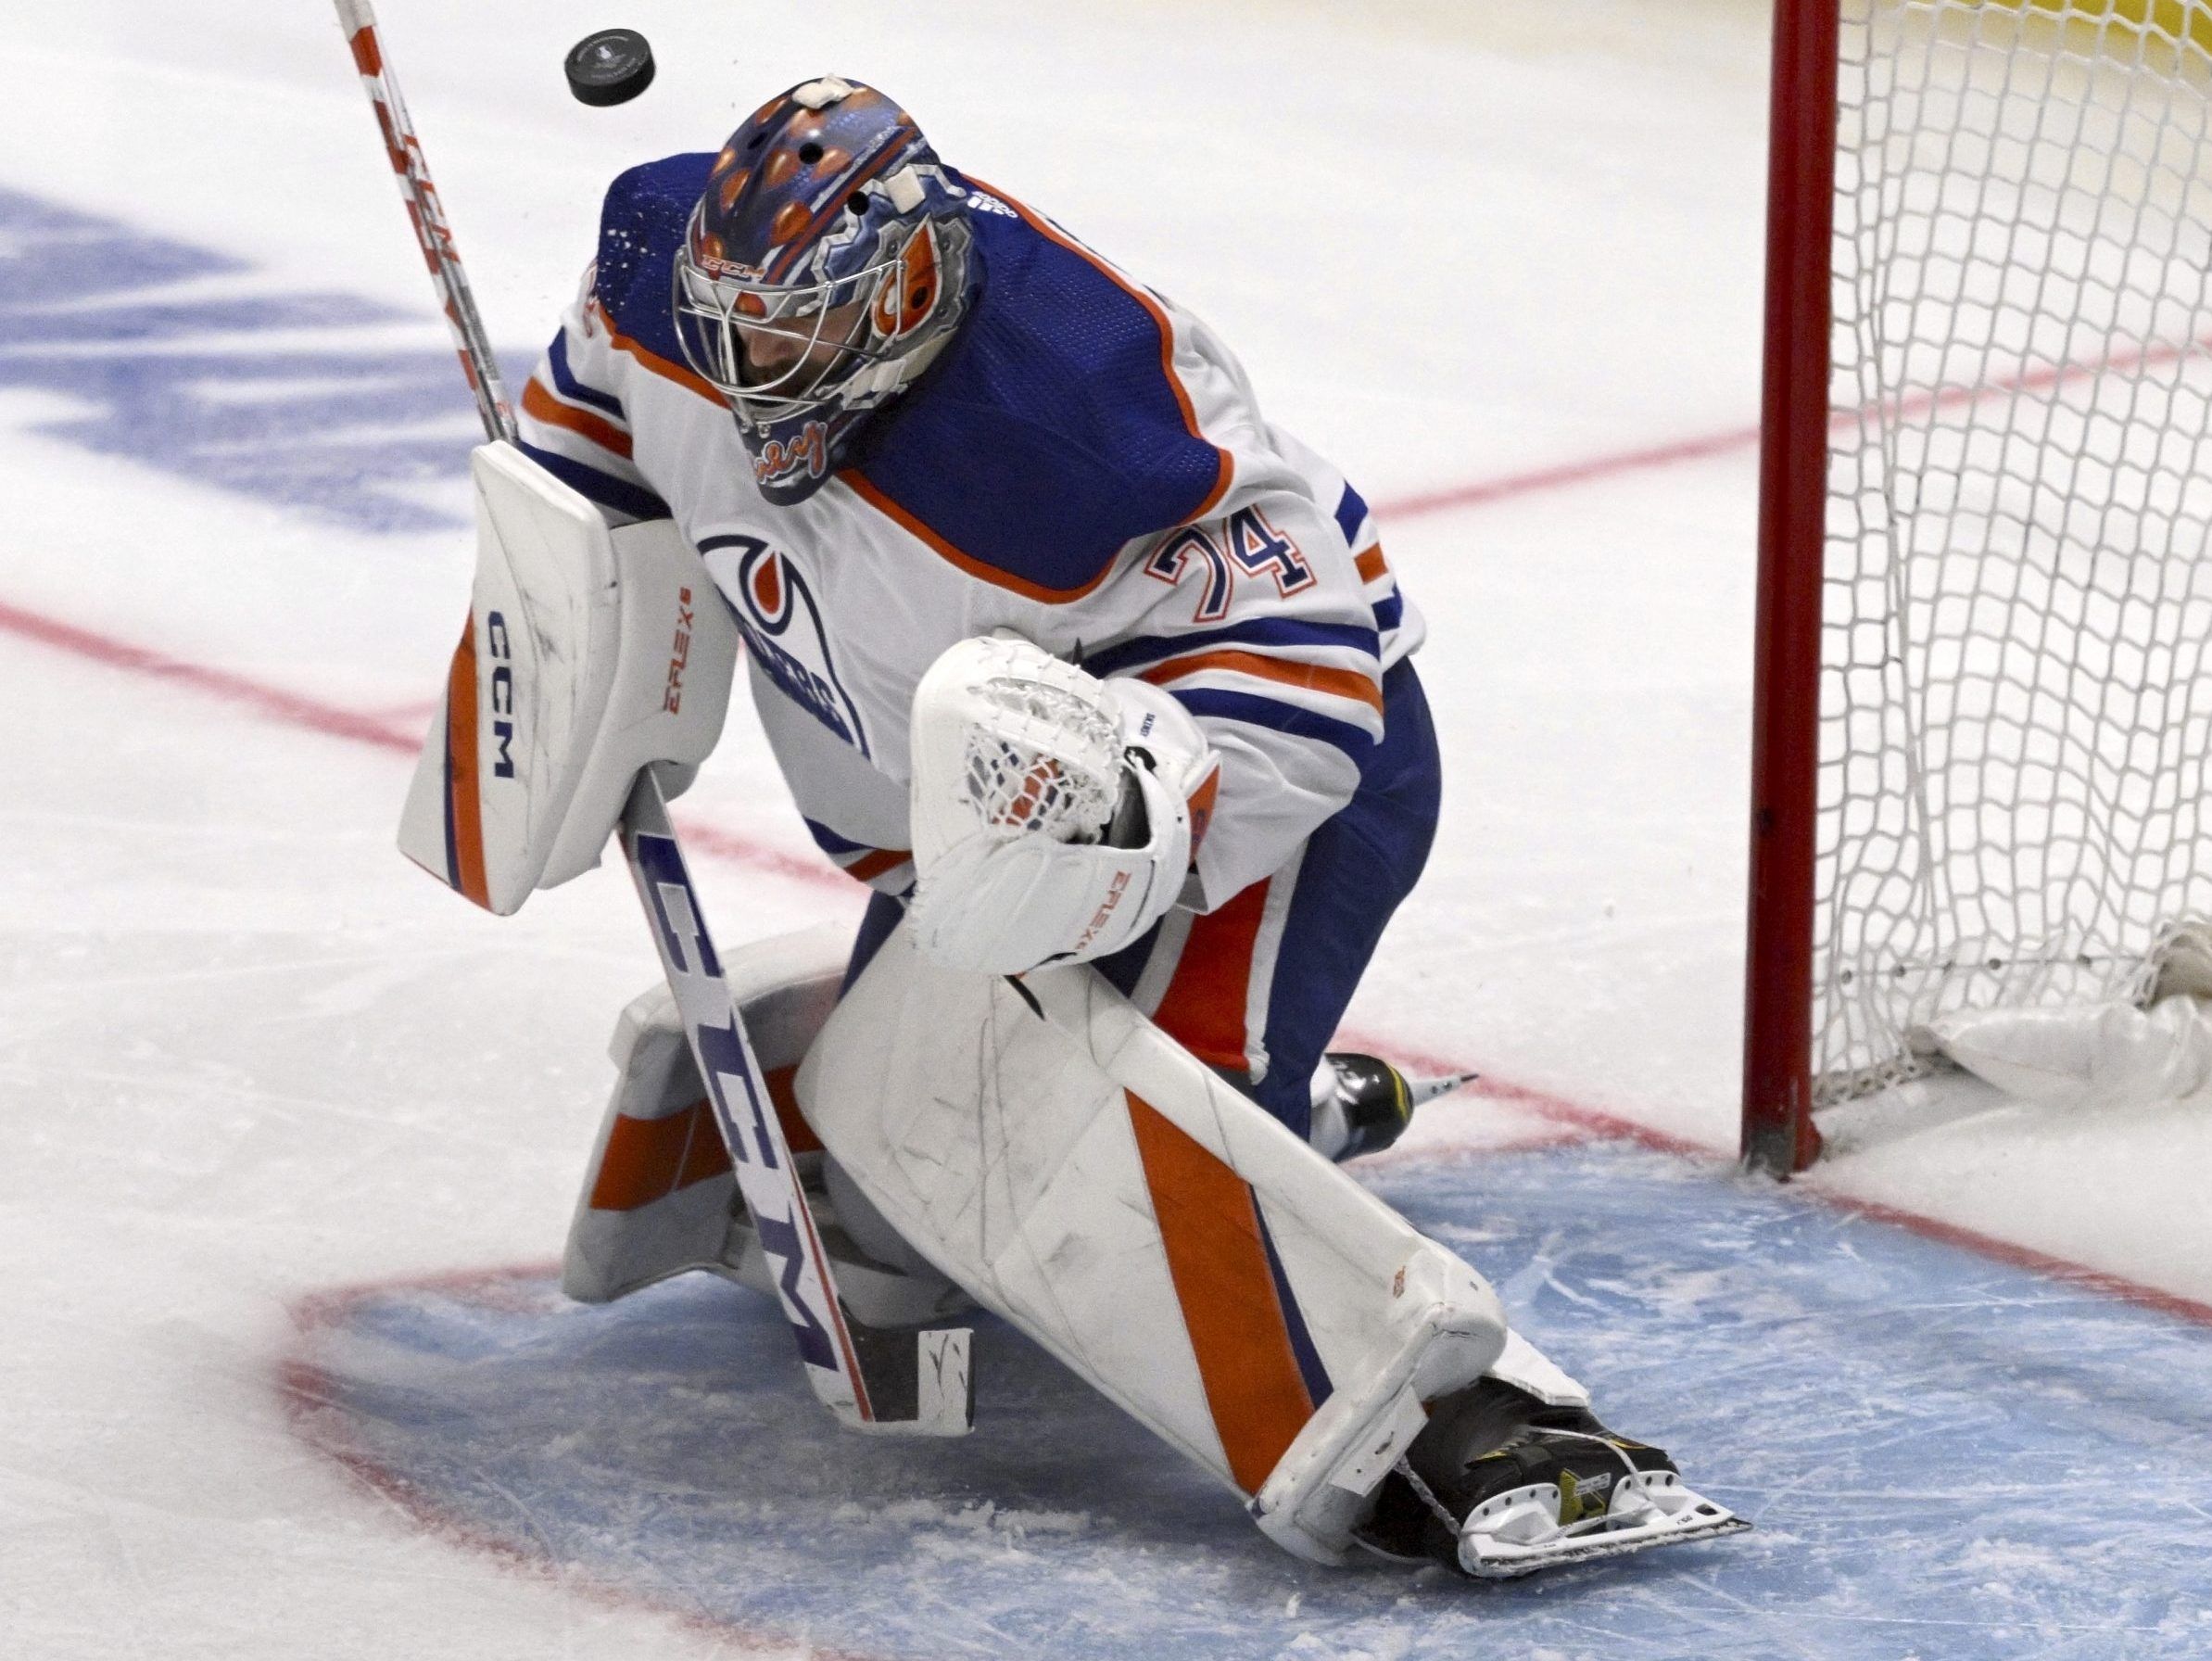 Could this year's Edmonton Oilers beat last year's Oilers? A Stanley